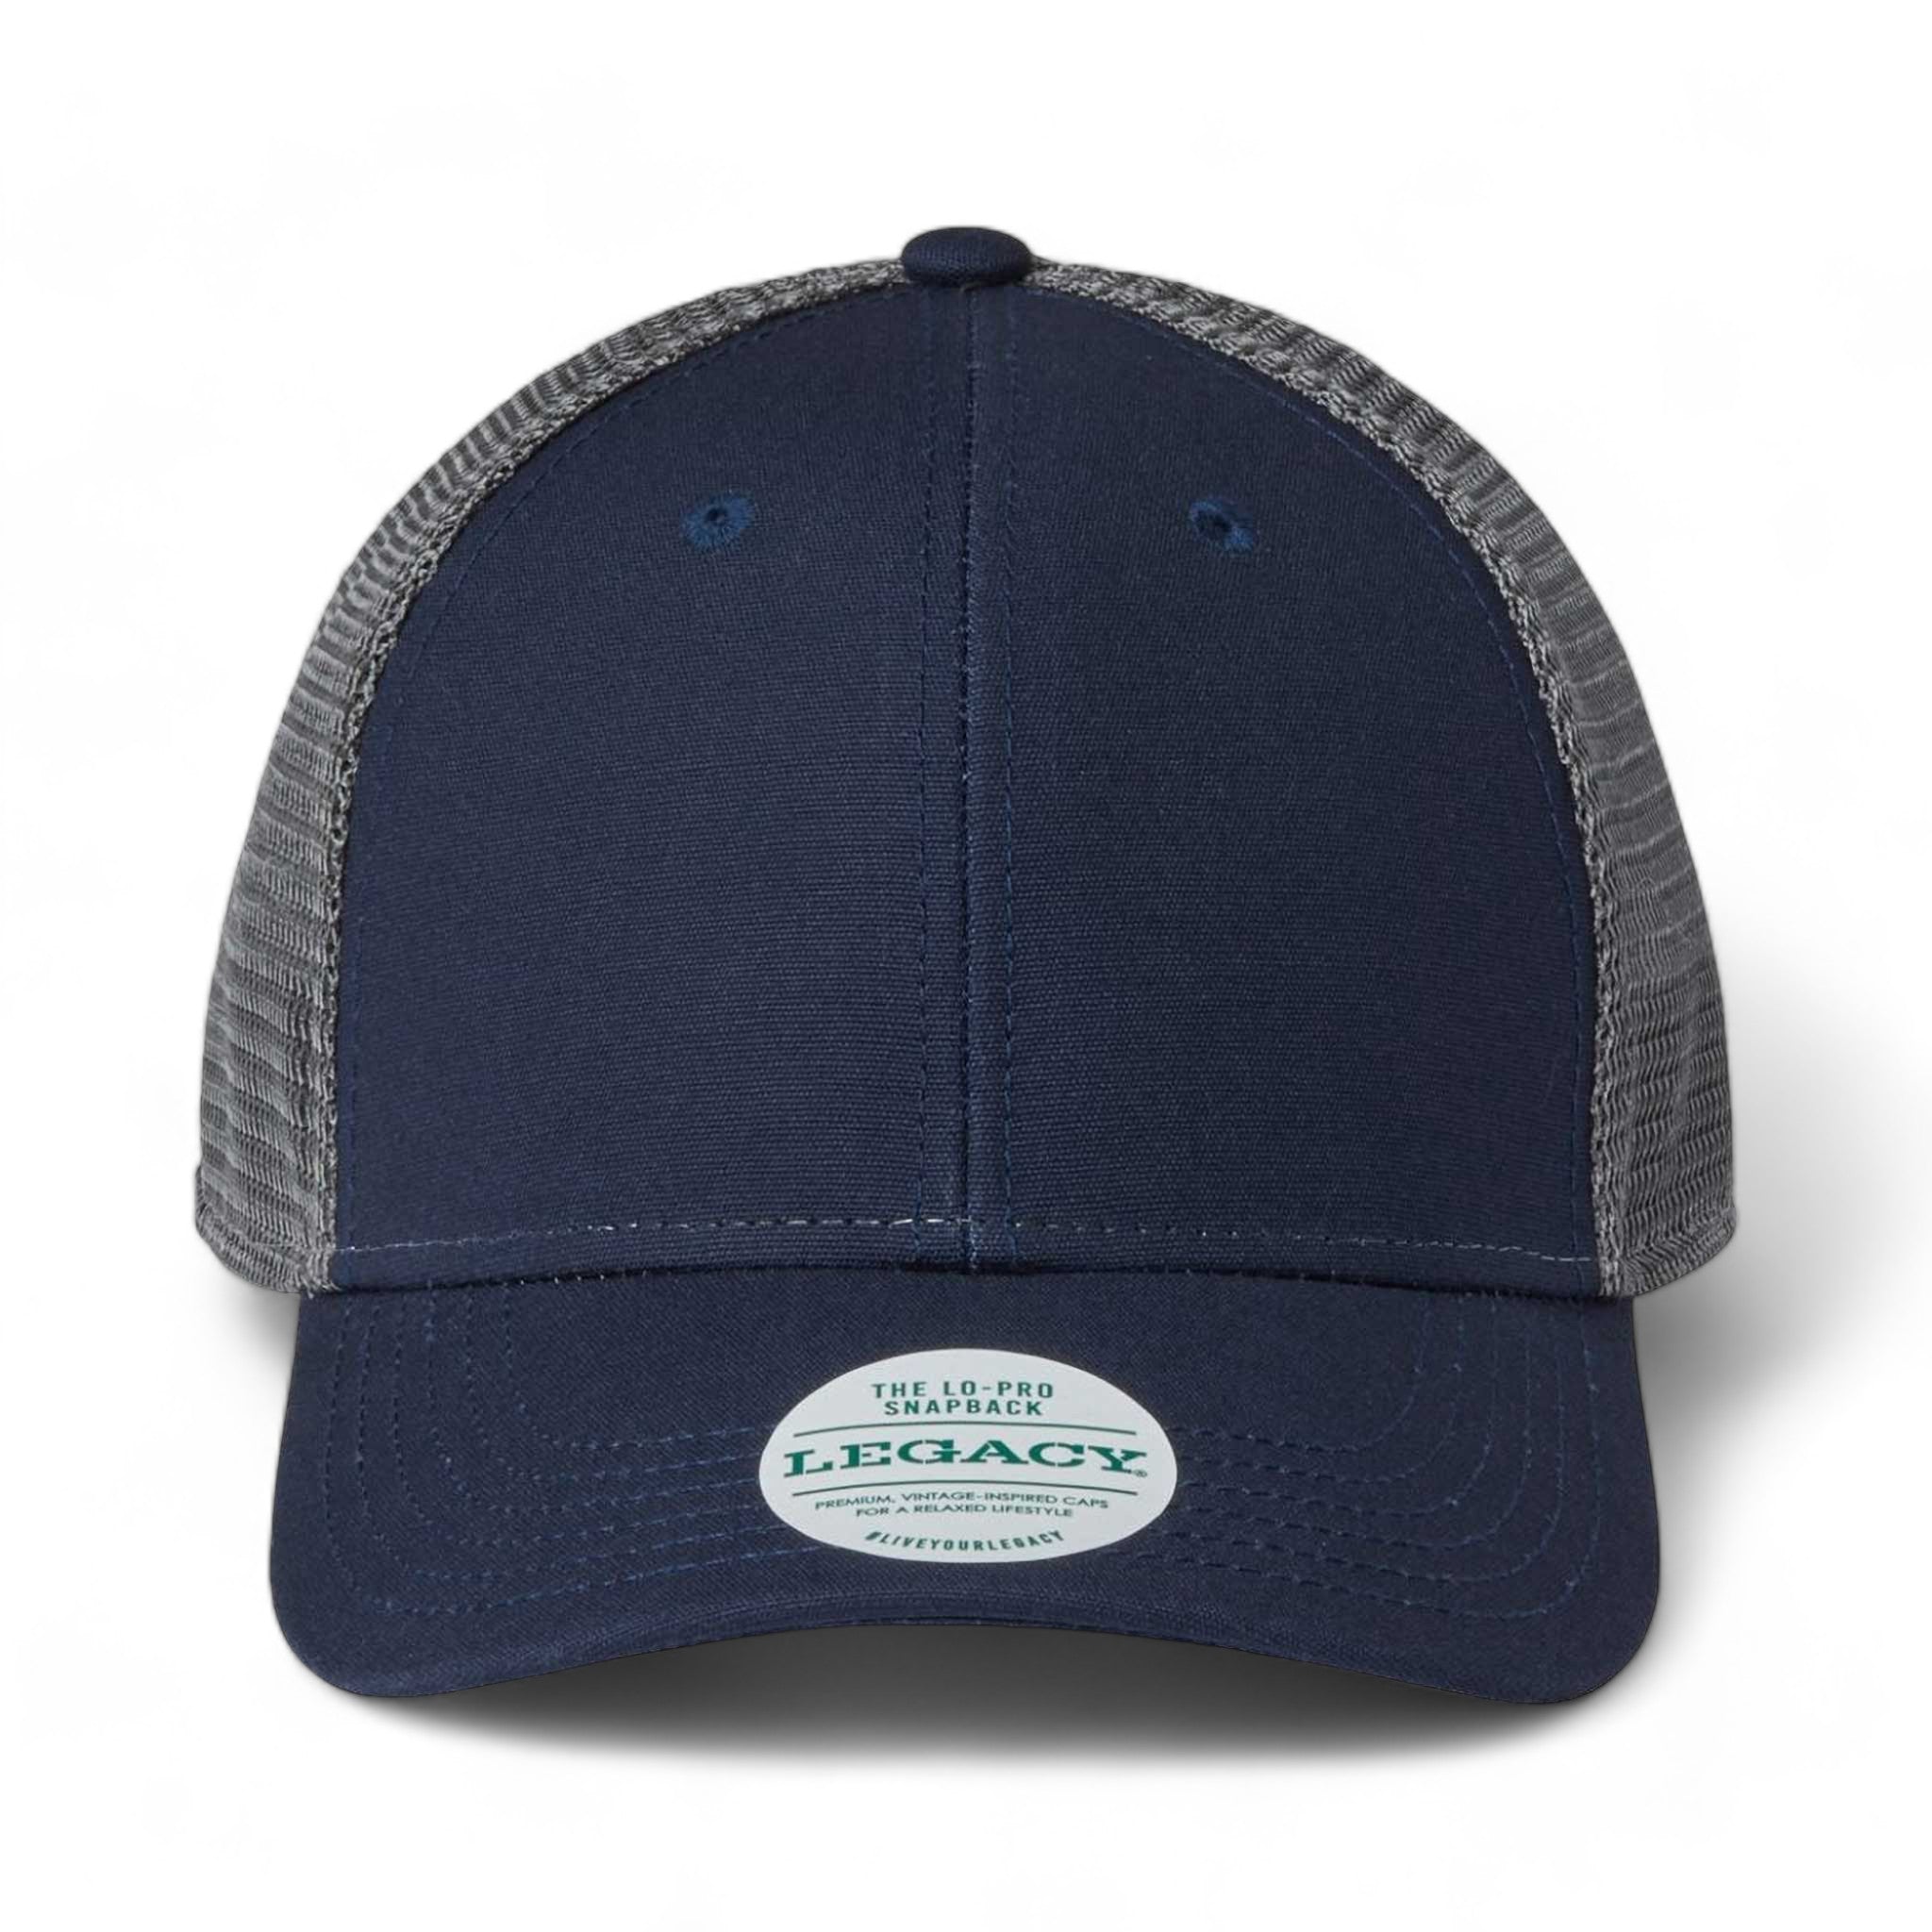 Front view of LEGACY LPS custom hat in navy and dark grey